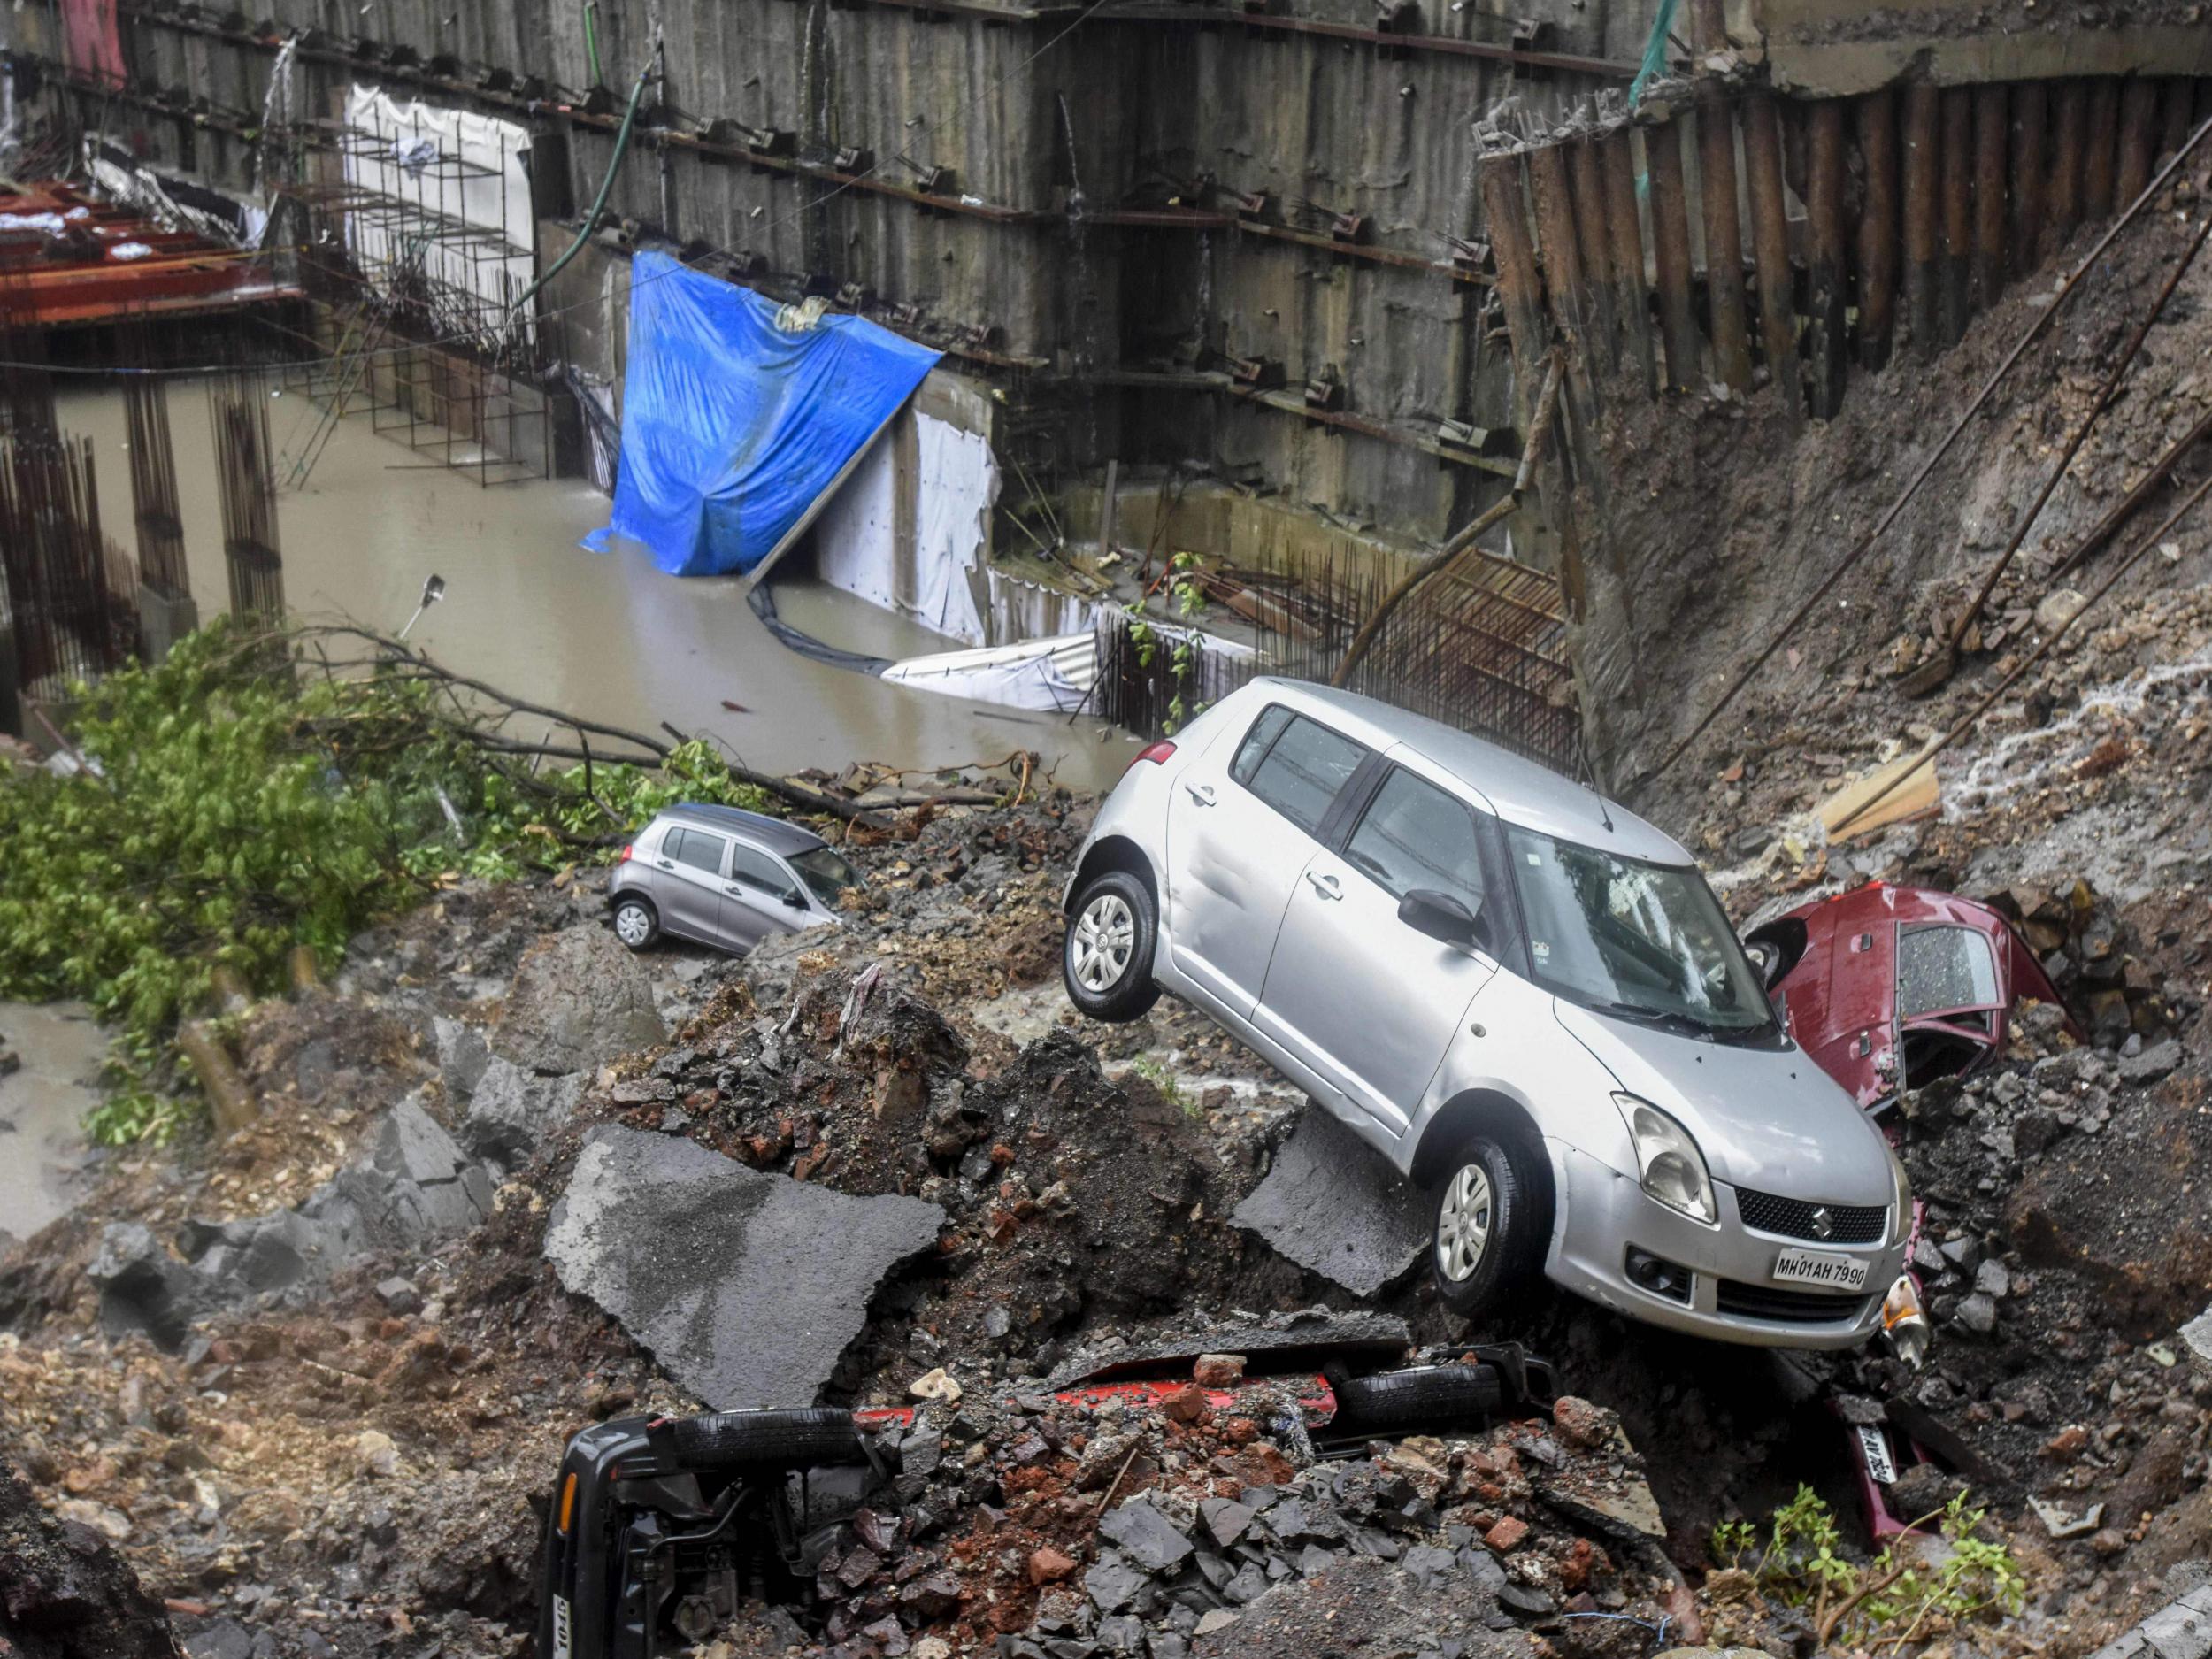 Damaged vehicles among debris after a landslide in Mumbai. India has been hit particularly hard by deadly landslides in recent years